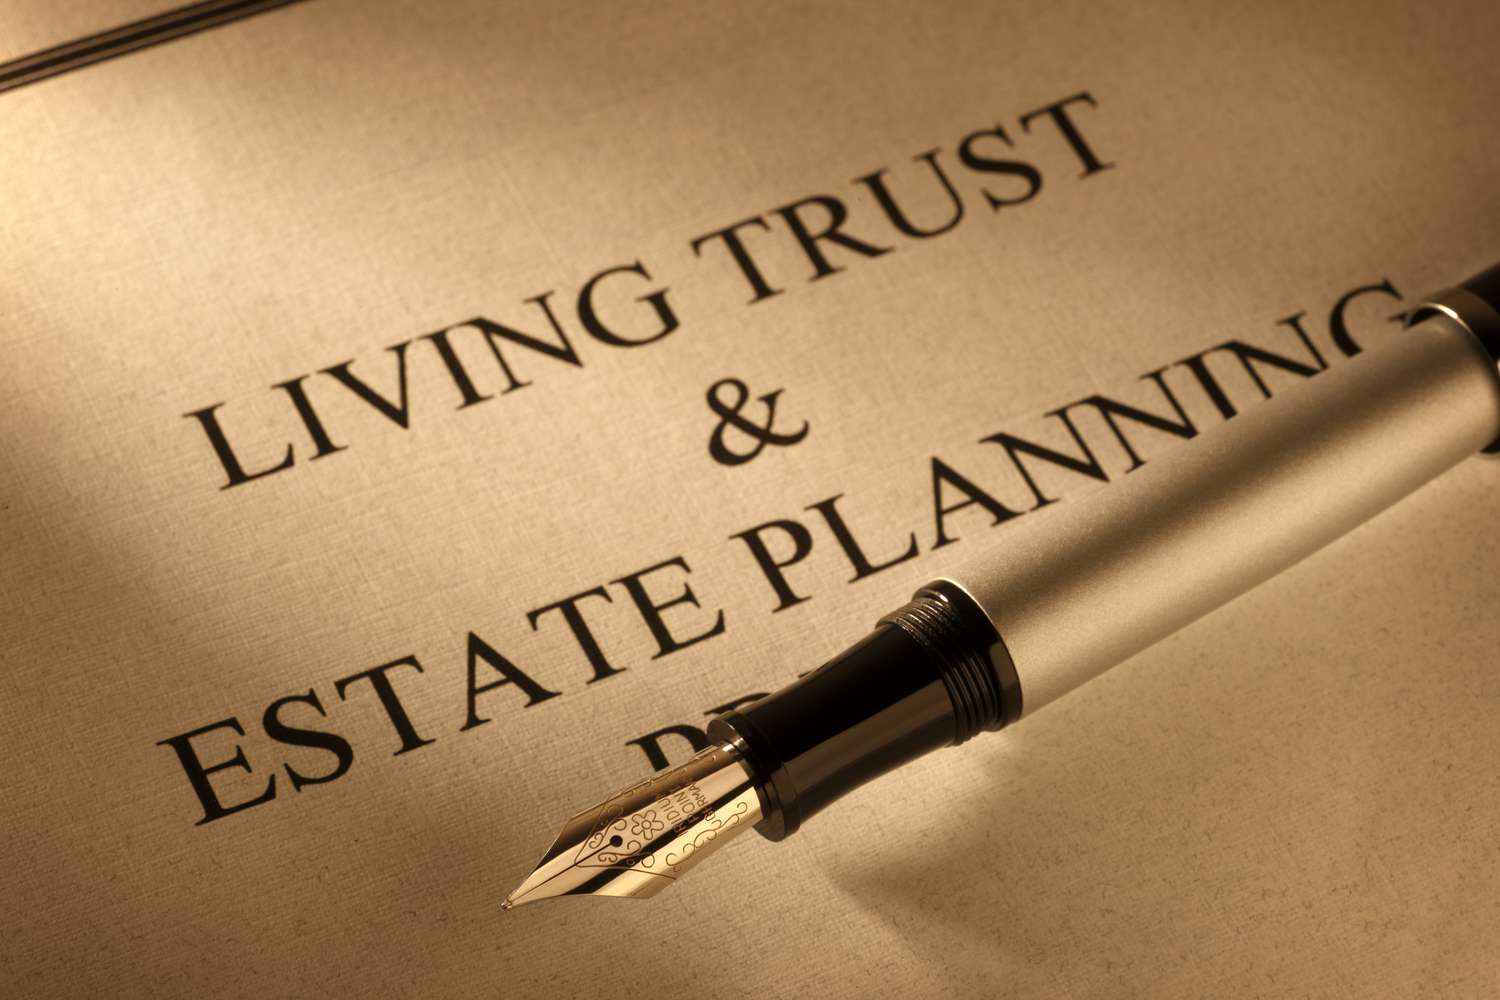 Securing Your Family’s Future: An Introduction to Estate Planning and LegalZoom’s Services